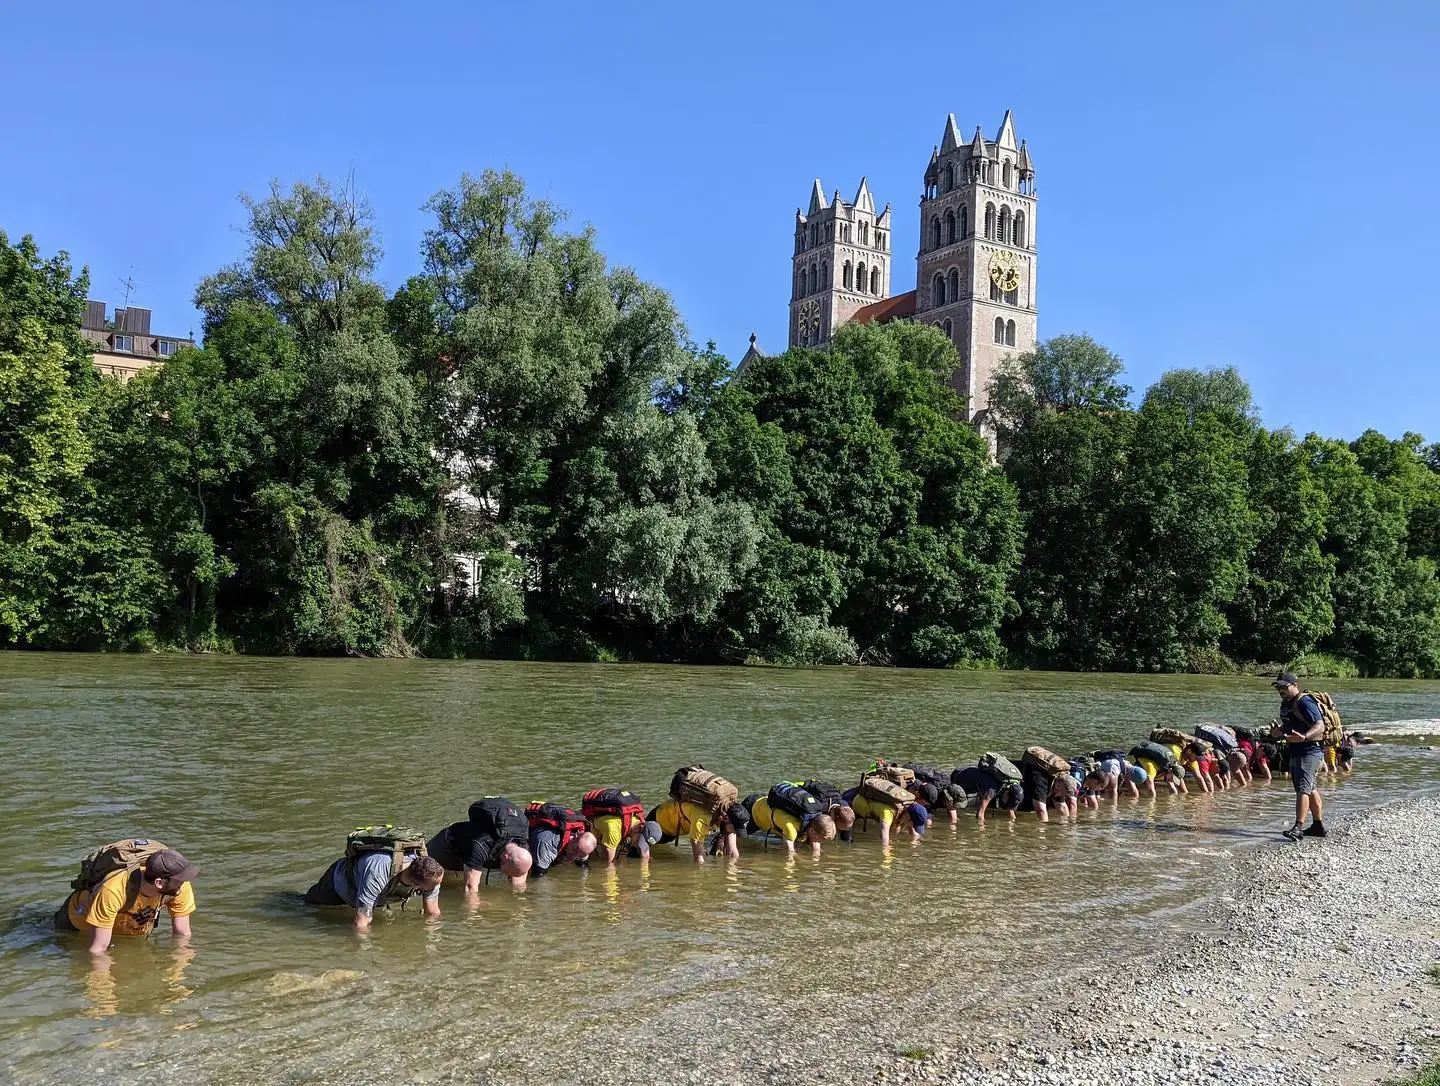 Team planking in the Isar